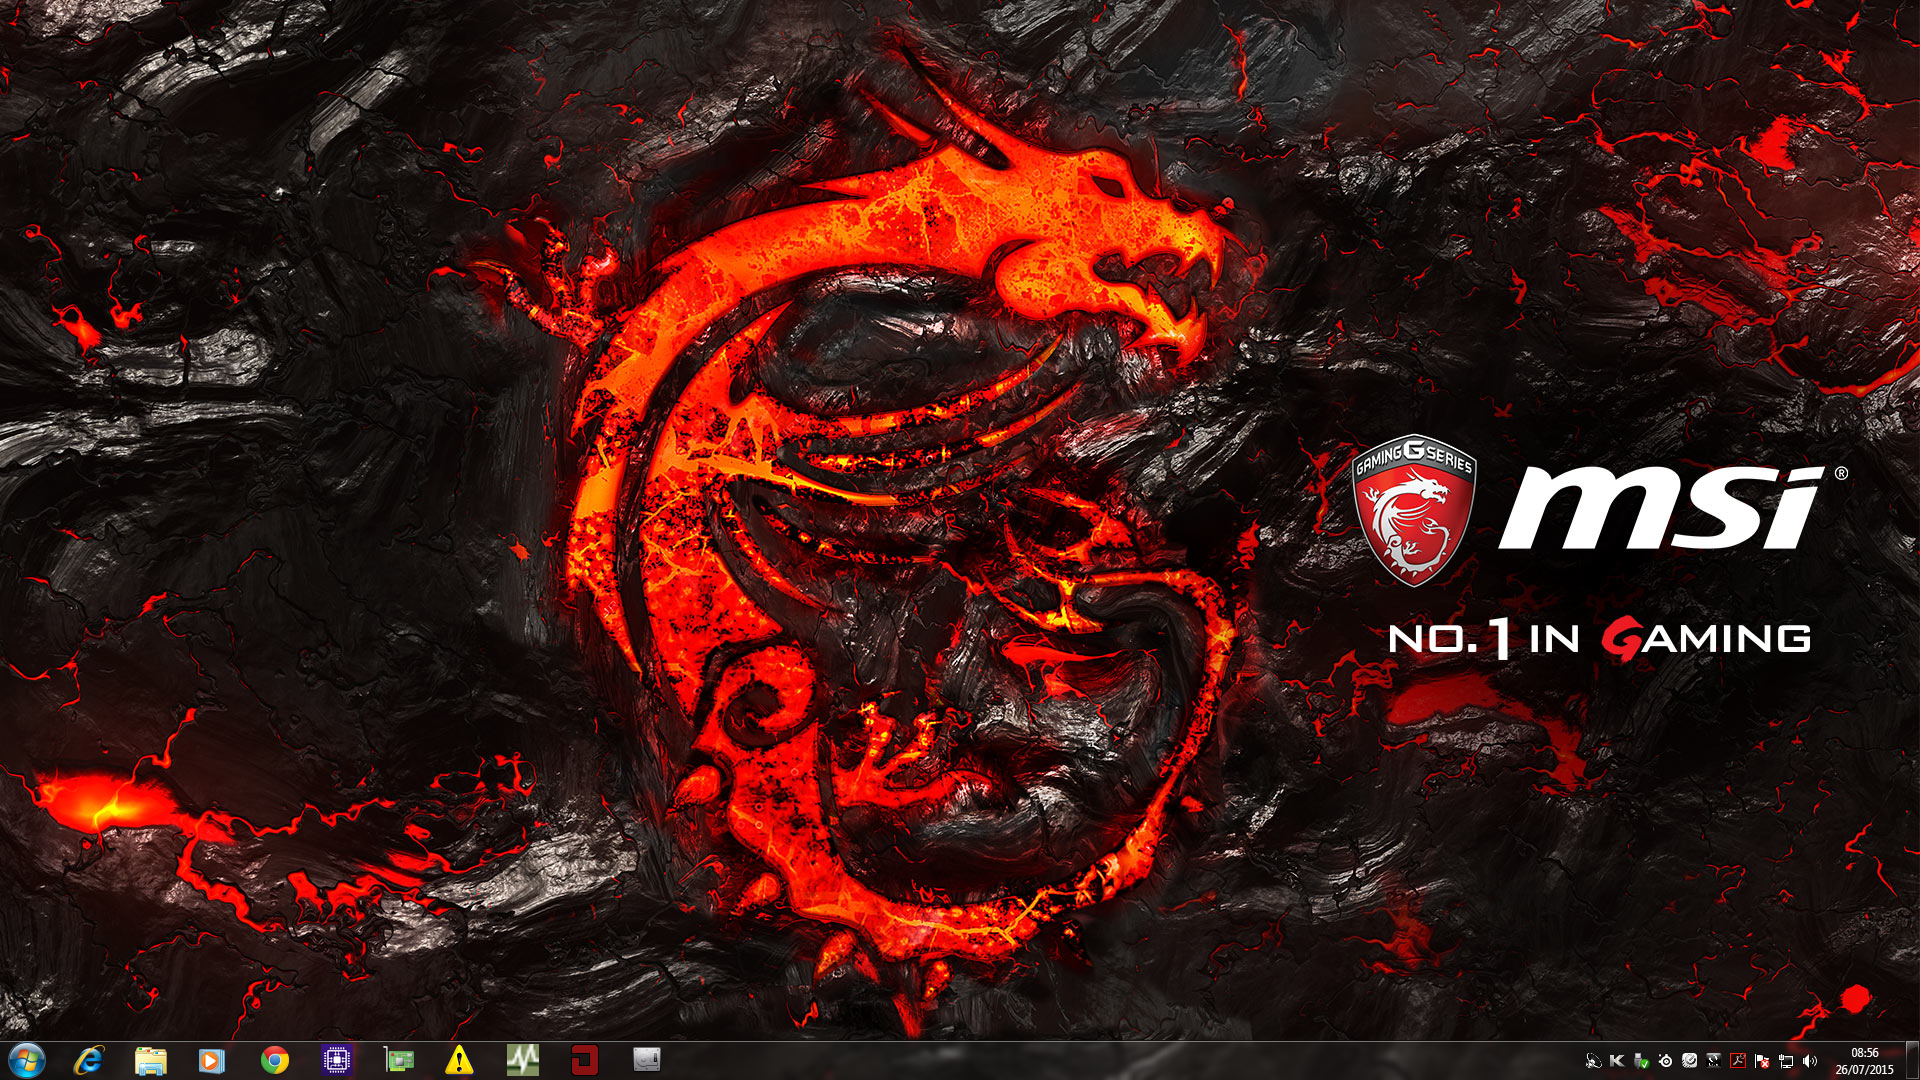  the driver disk is that MSI puts in a dragon based logo background